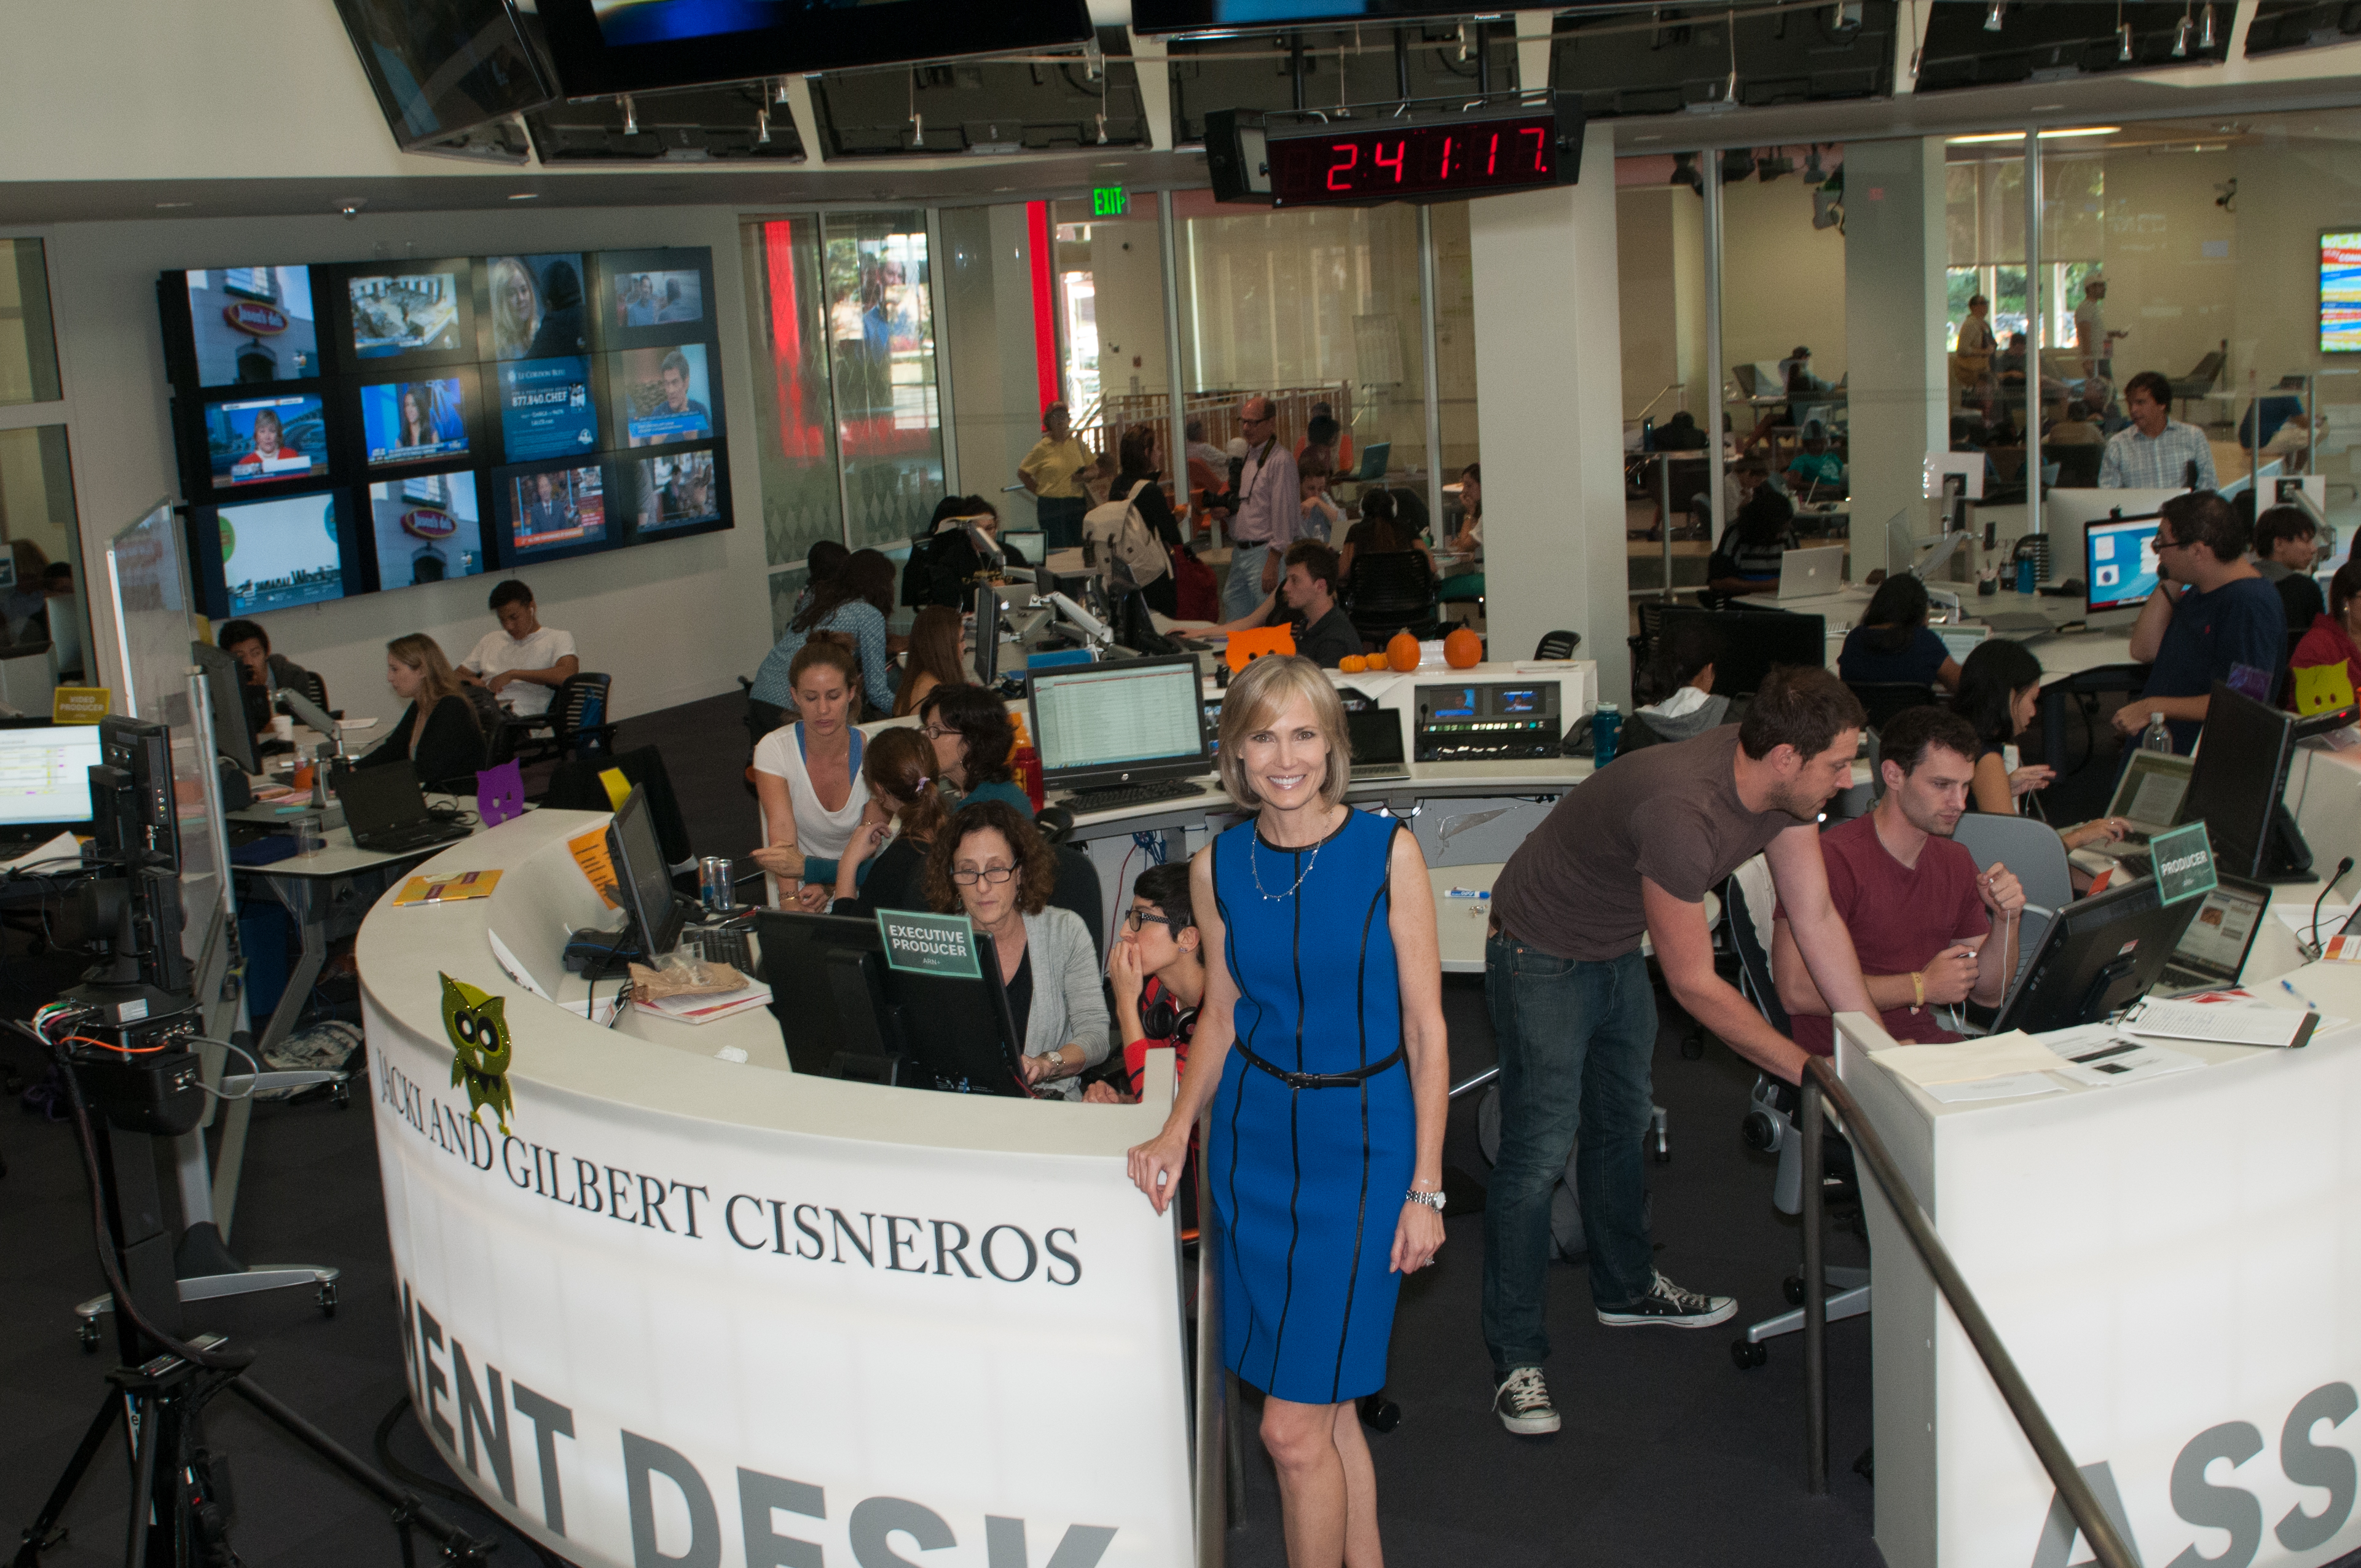 Next-Generation Newsroom | USC Annenberg School for Communication and